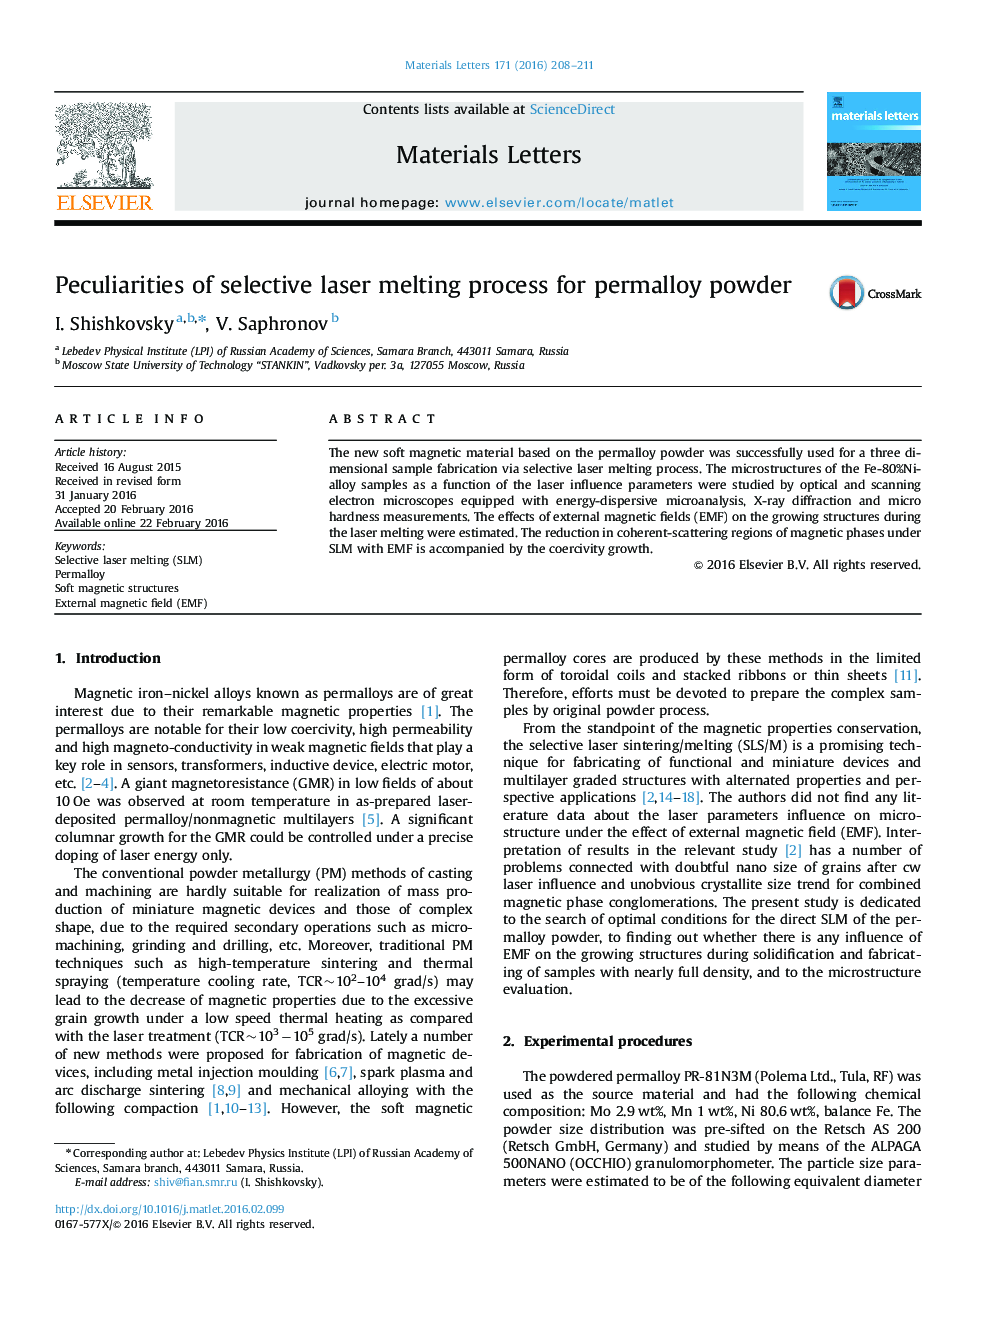 Peculiarities of selective laser melting process for permalloy powder